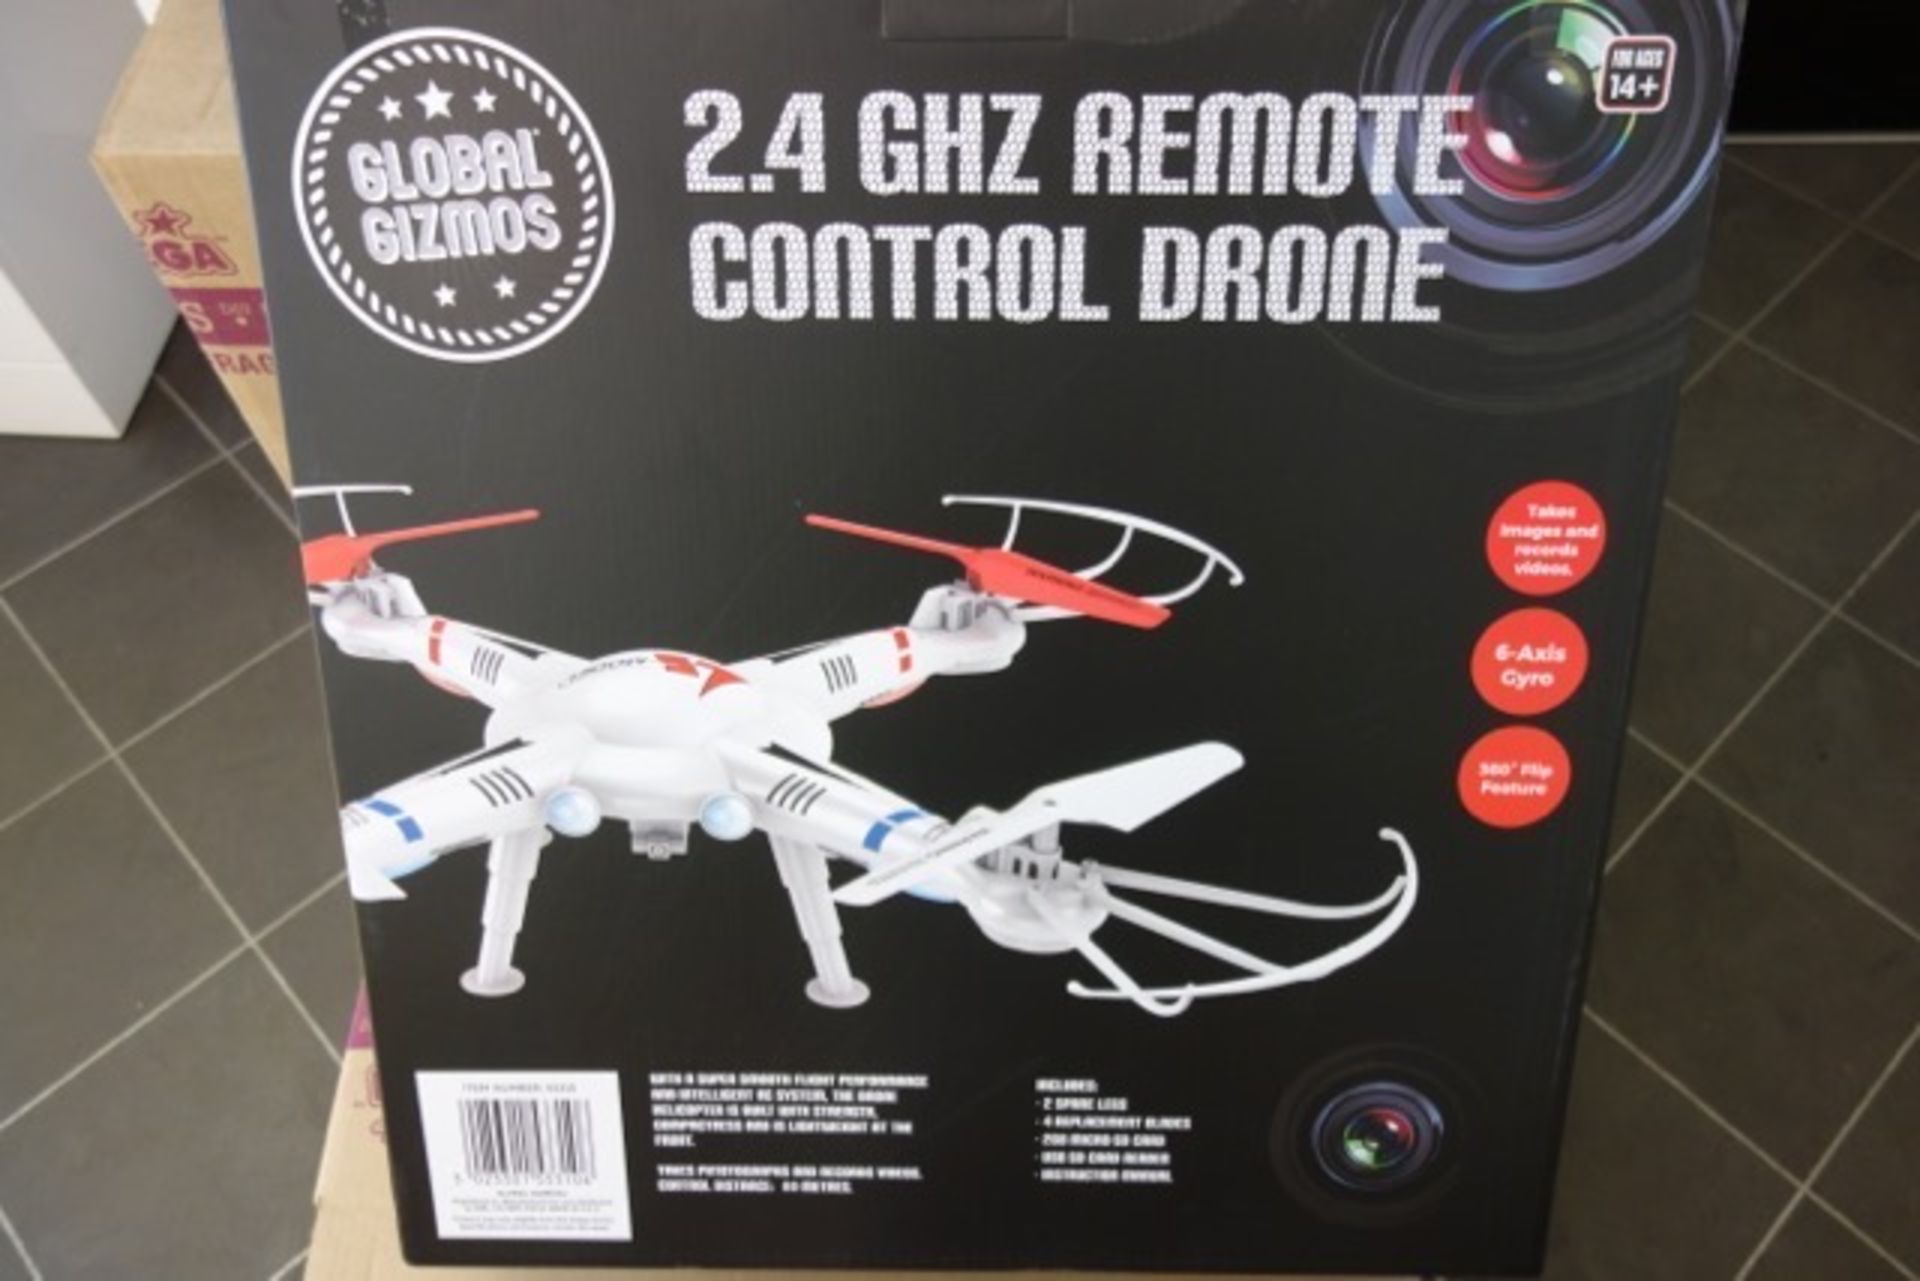 1 x Brand New Global Gizmos 2.4GHZ Remote Control Drone. Takes images & records videos - Image 3 of 4